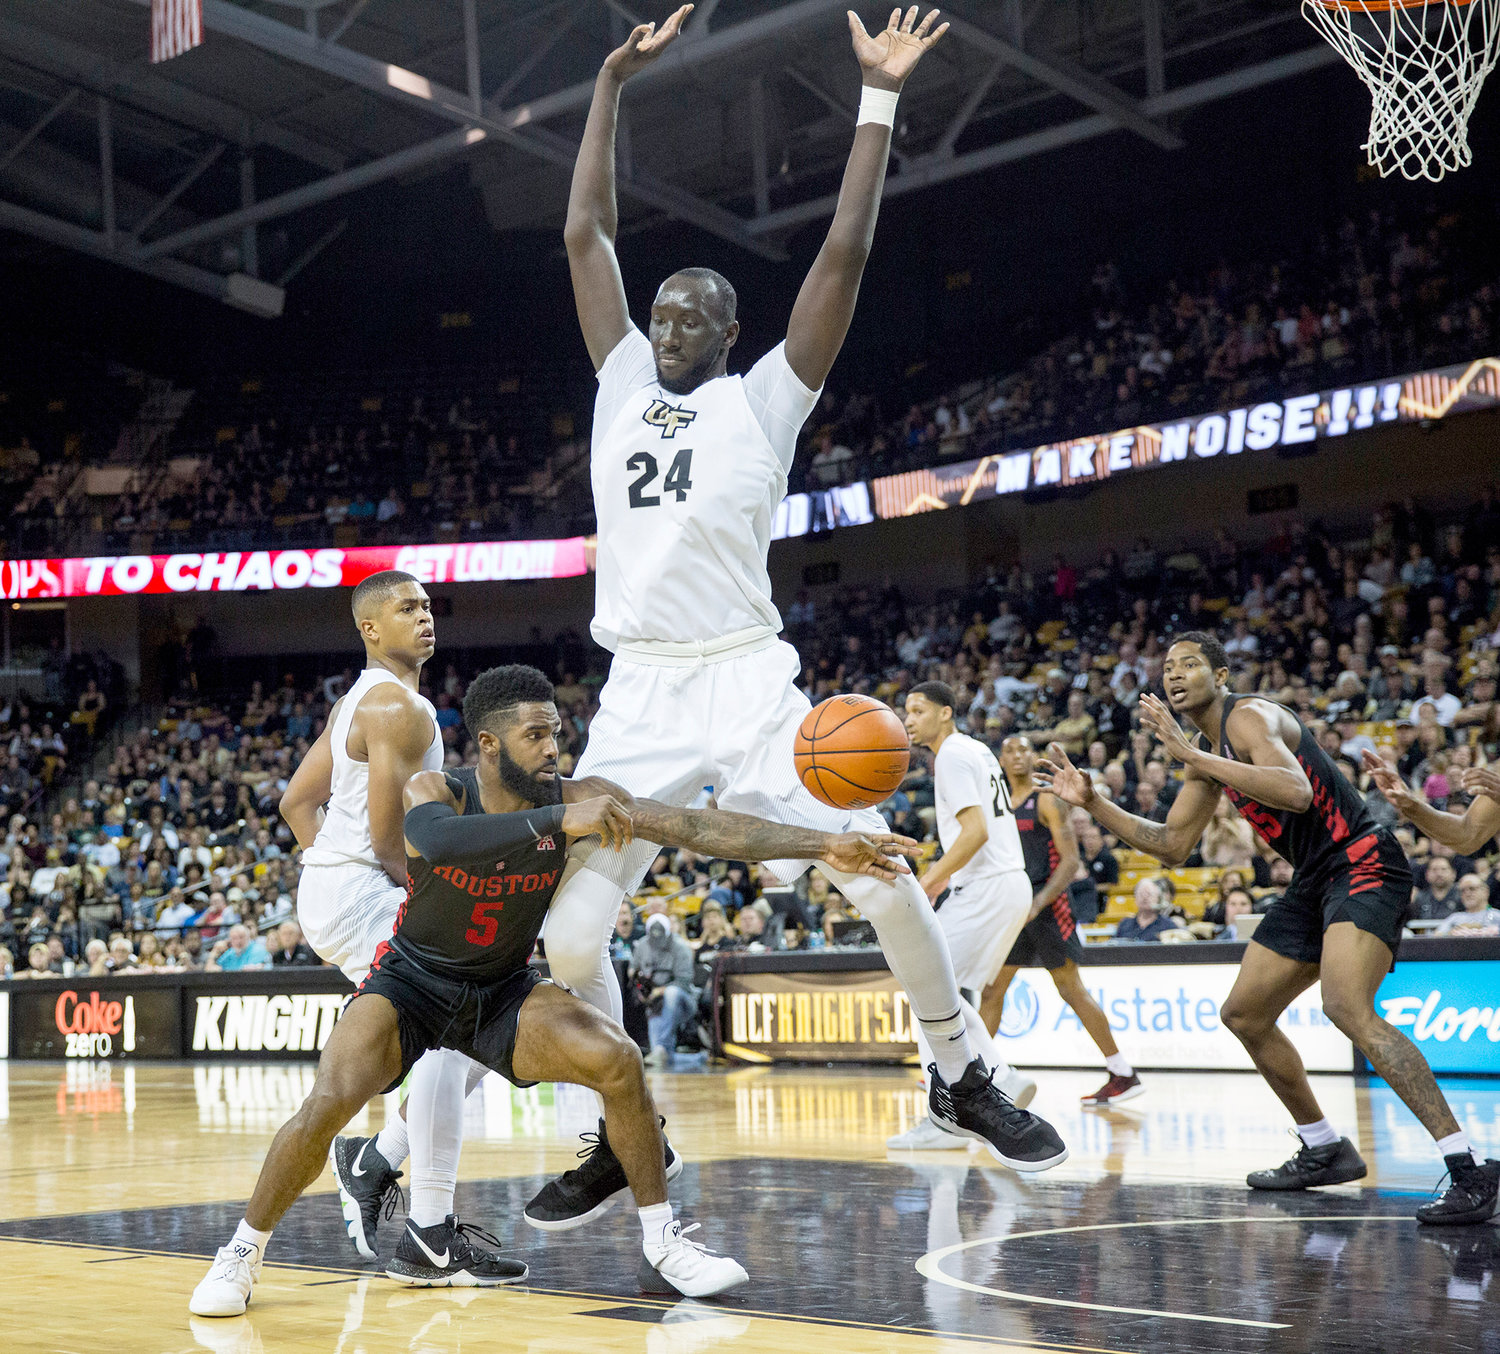 Top-seeded Duke escapes Tacko Fall and UCF by 1 point | The Cleveland Daily Banner